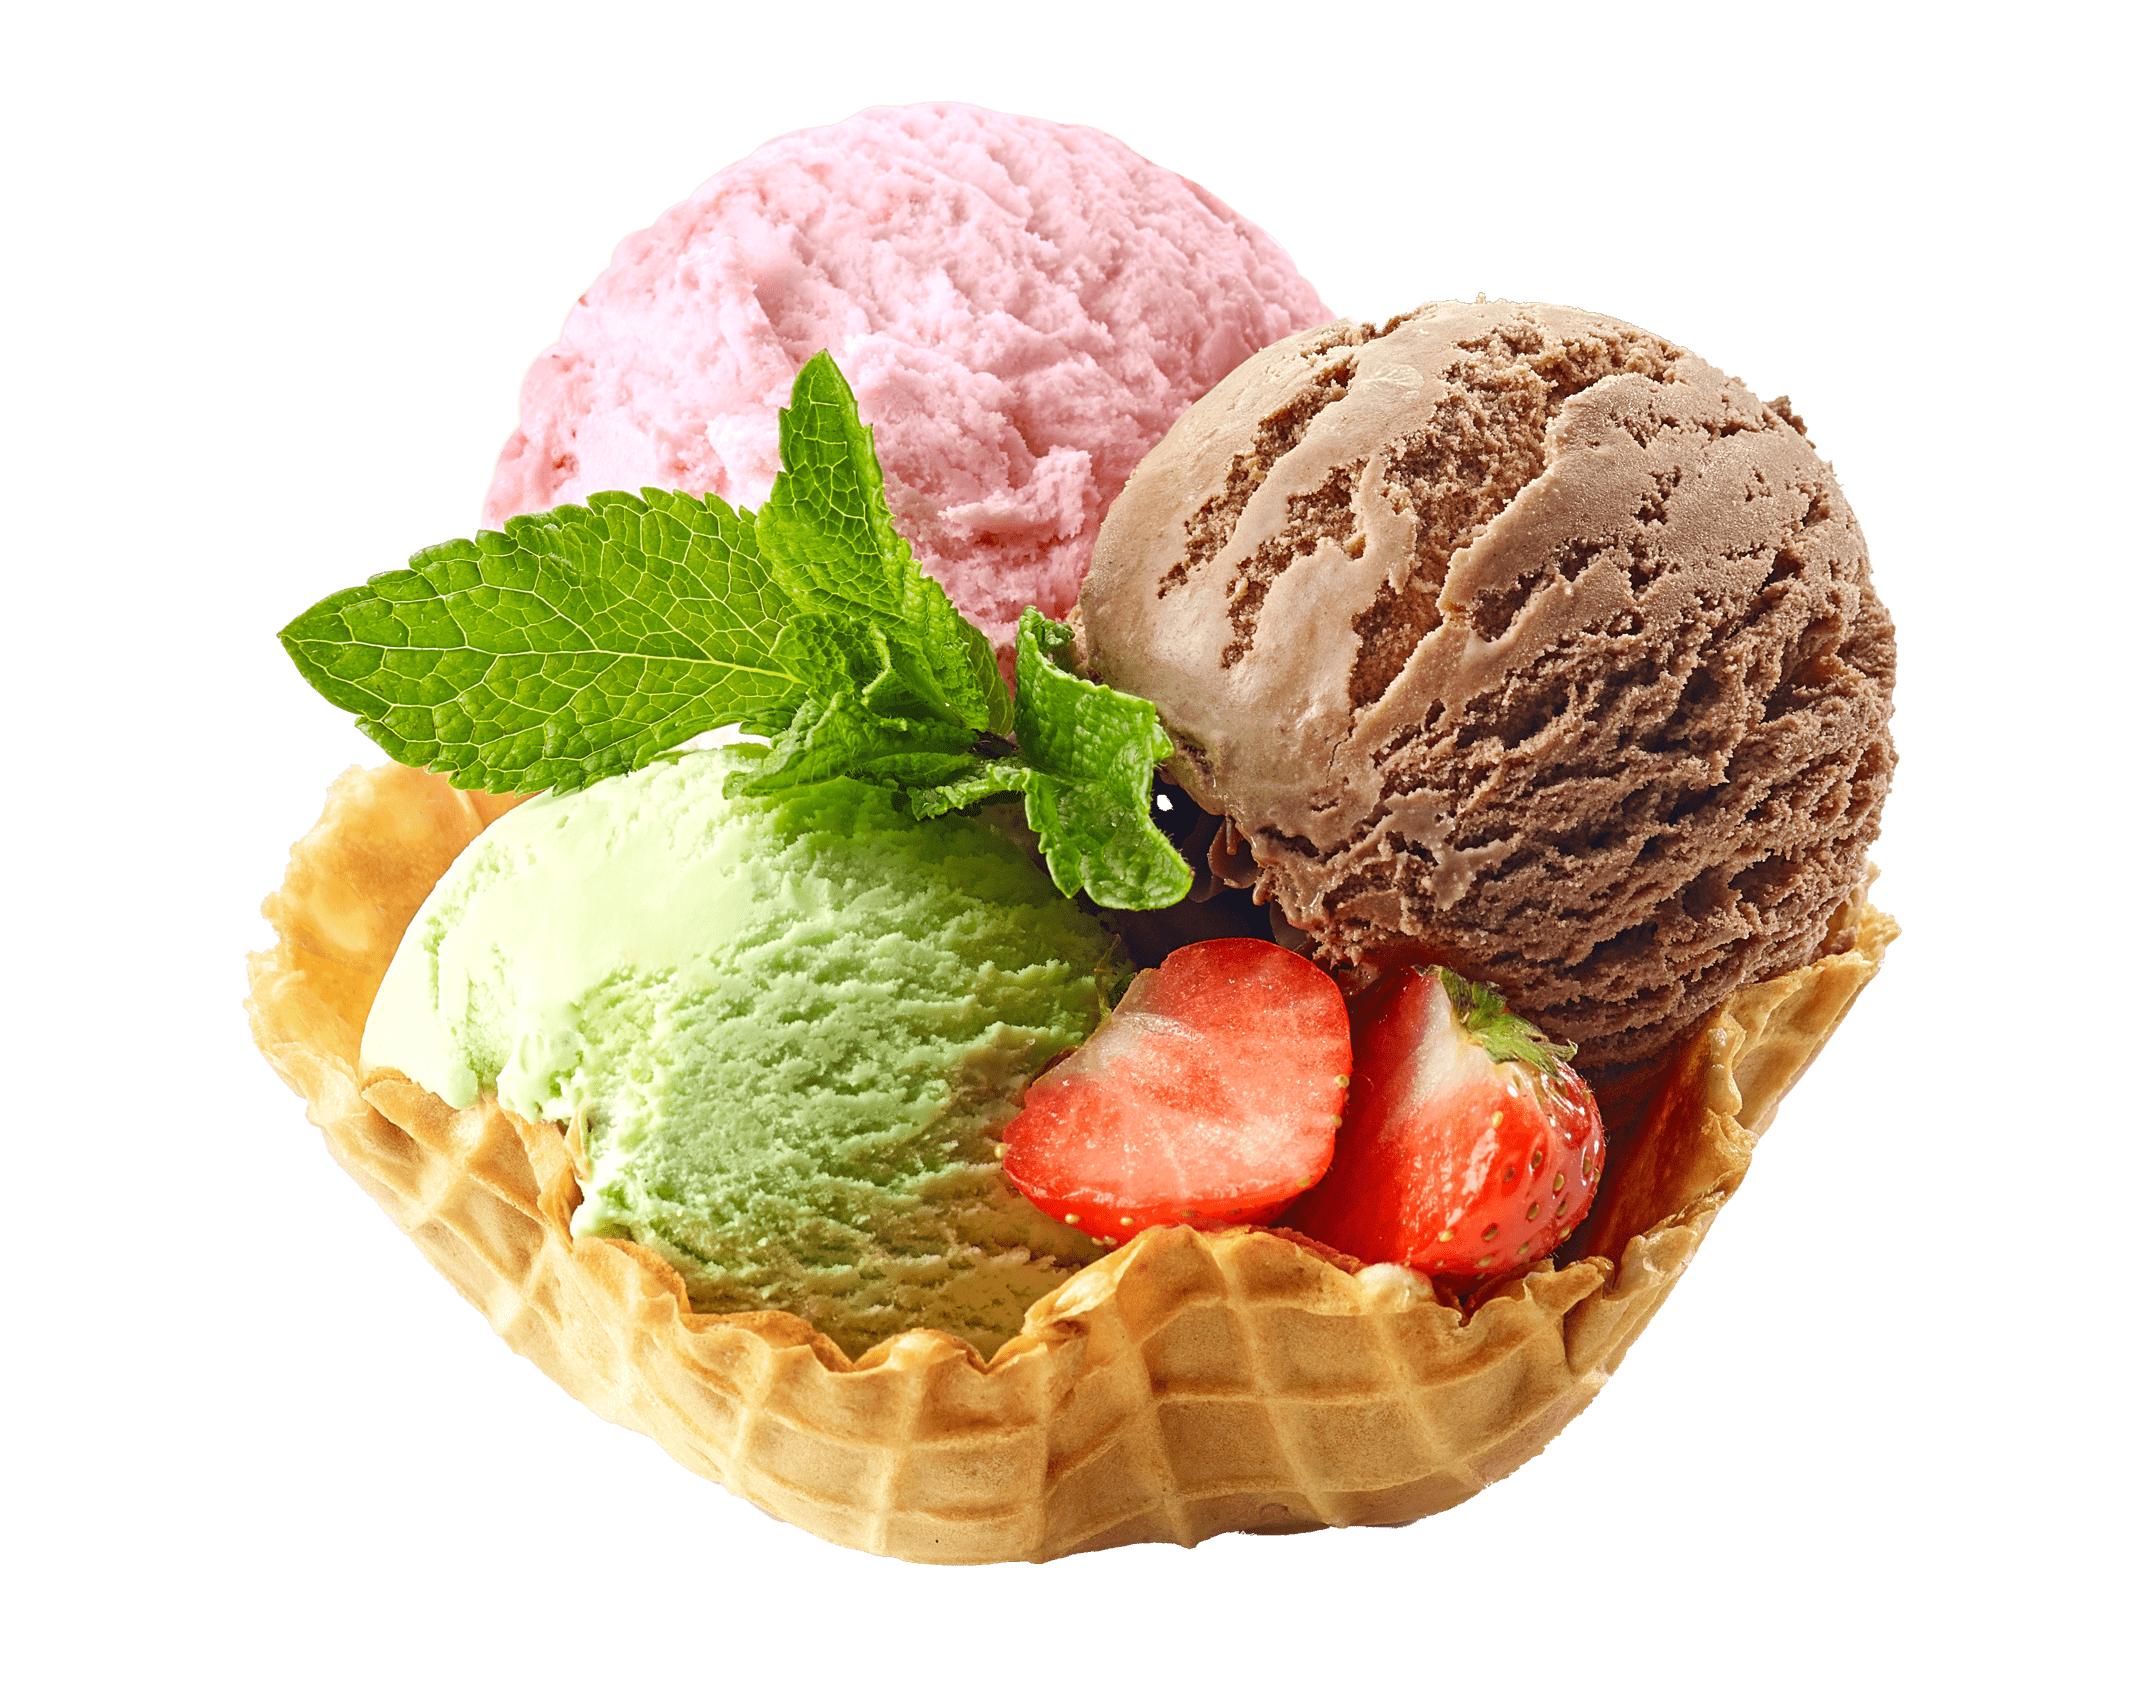 Flavoured hard ice cream scoops in a waffle cone bowl with sliced strawberries